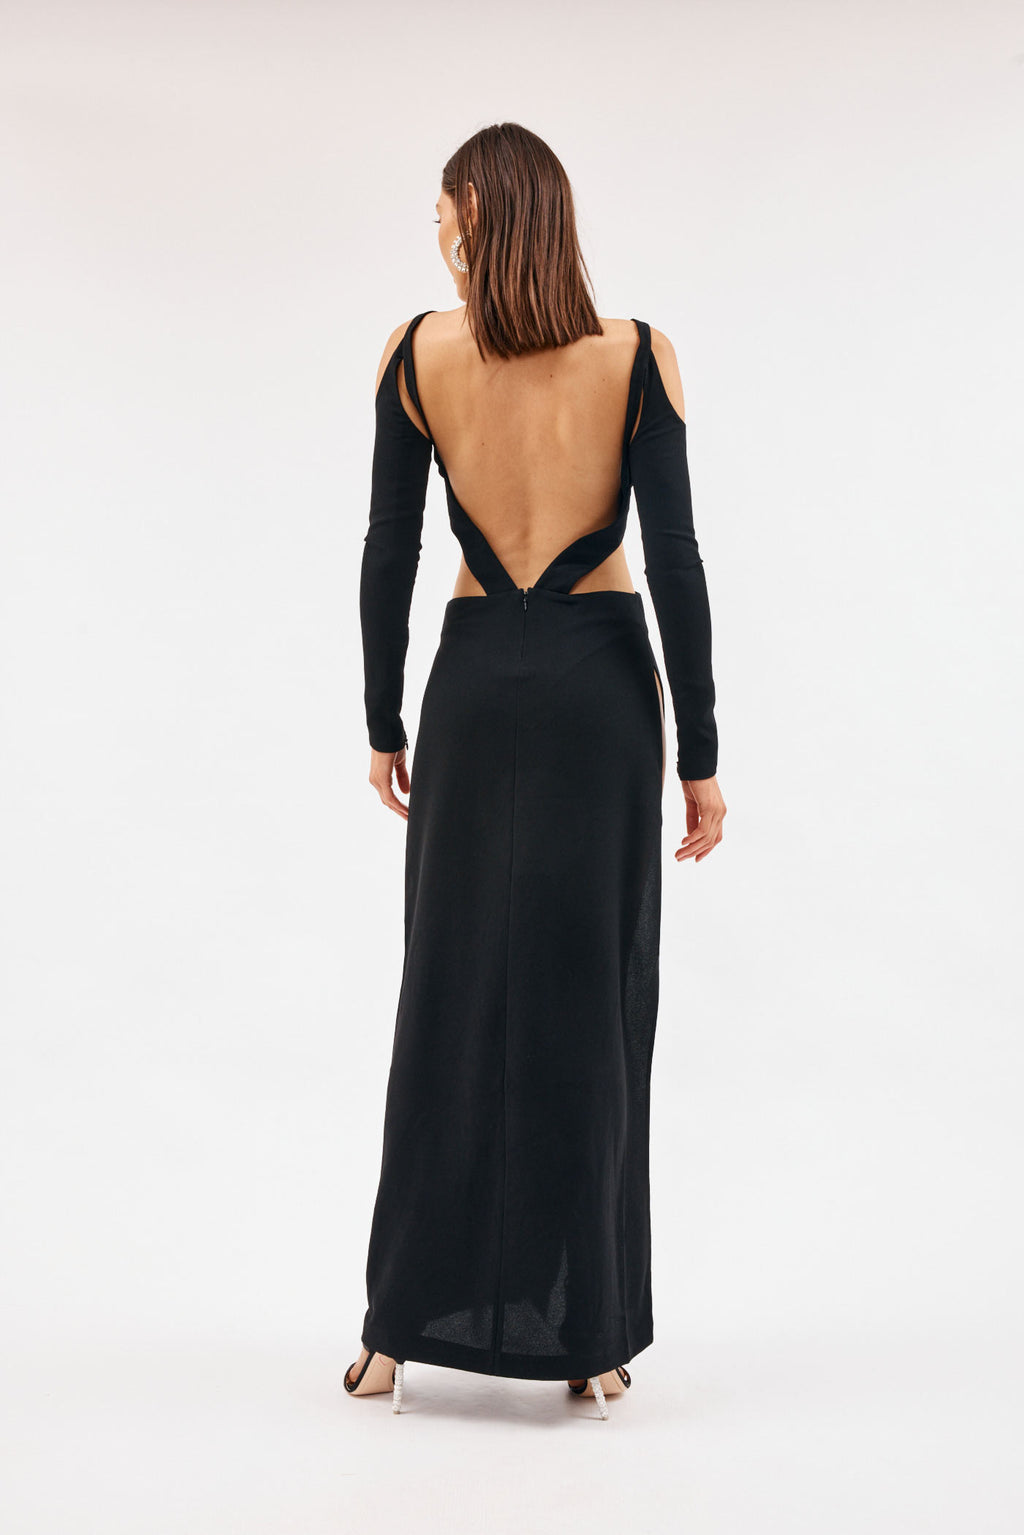 Backless Cut Out Black Dress